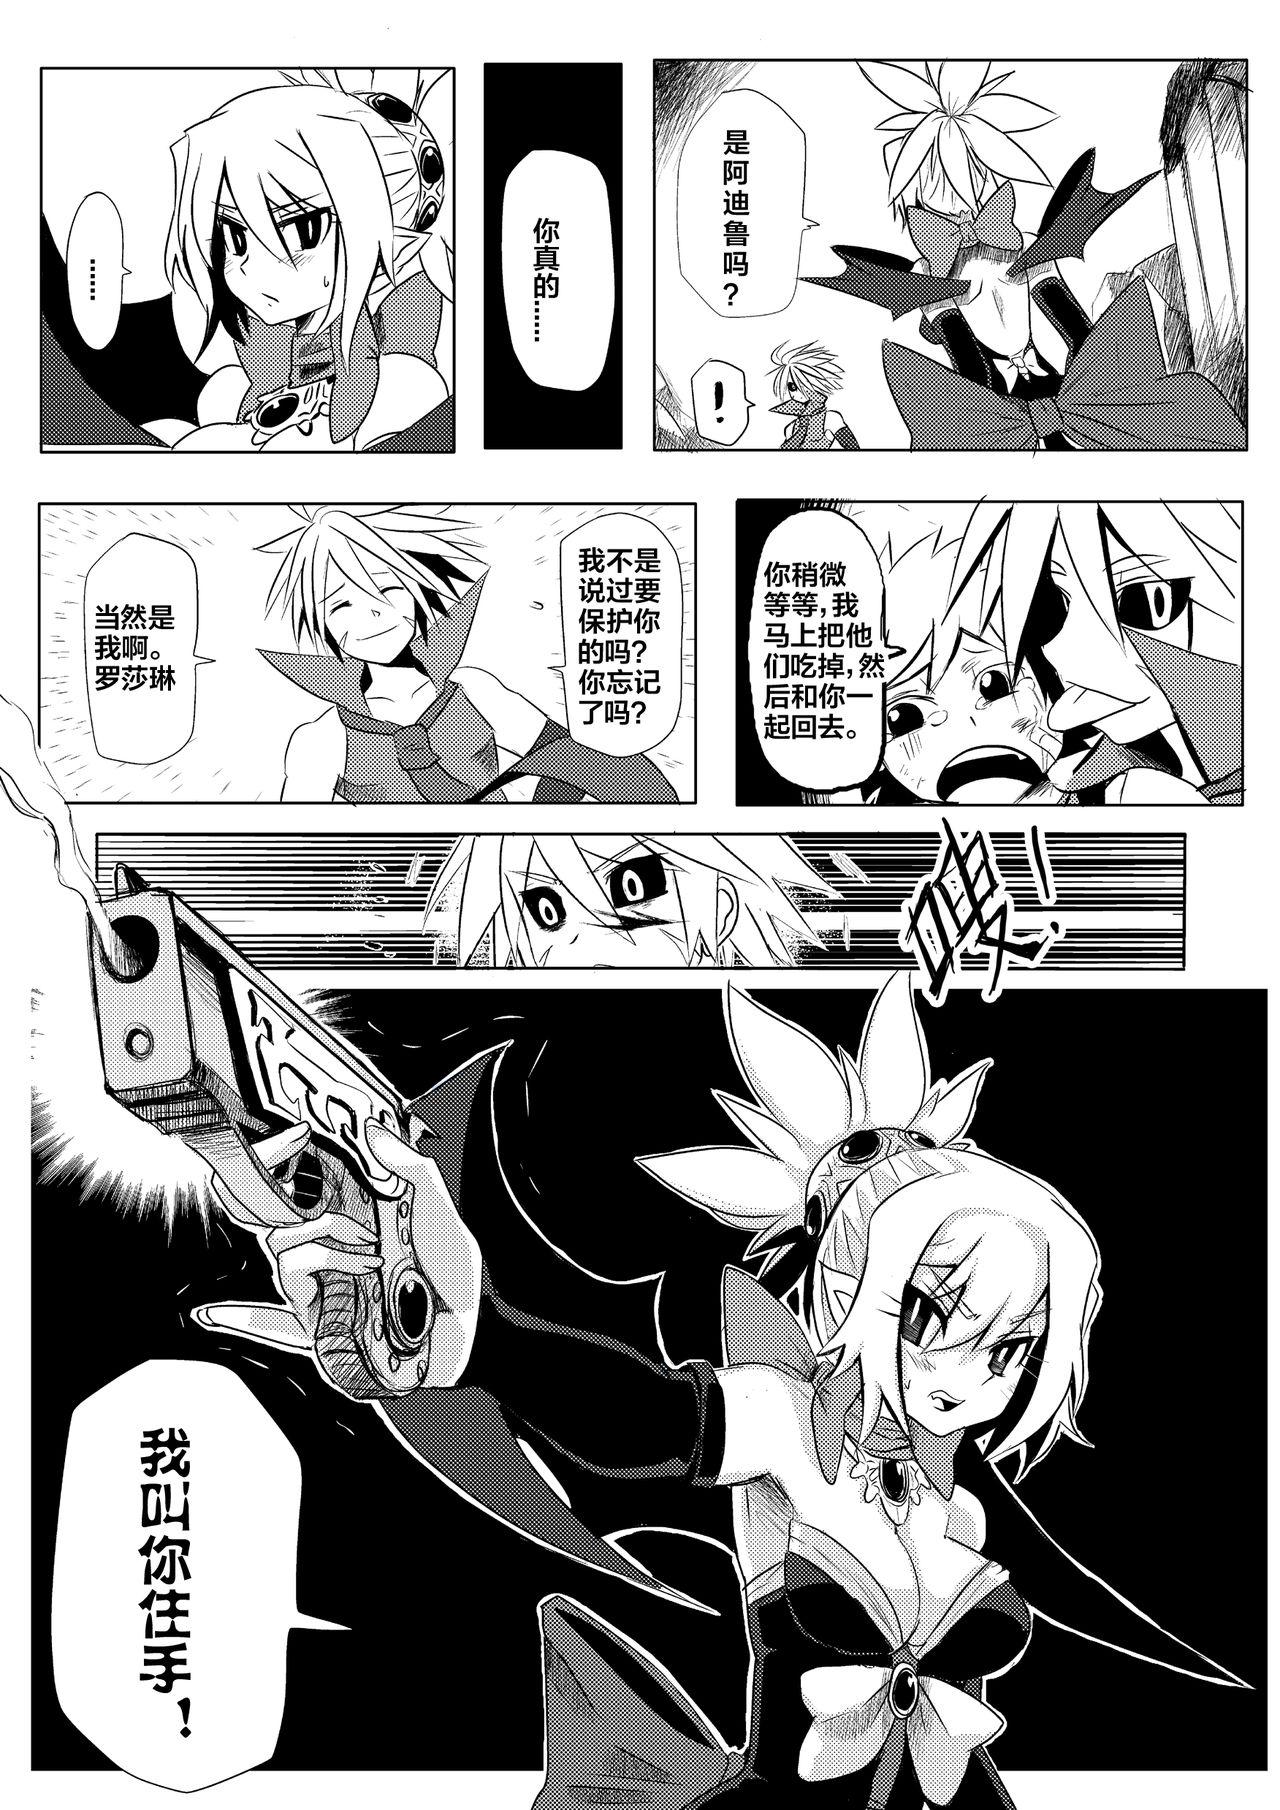 Workout 魔界戰記2 - Disgaea Brazzers - Page 14